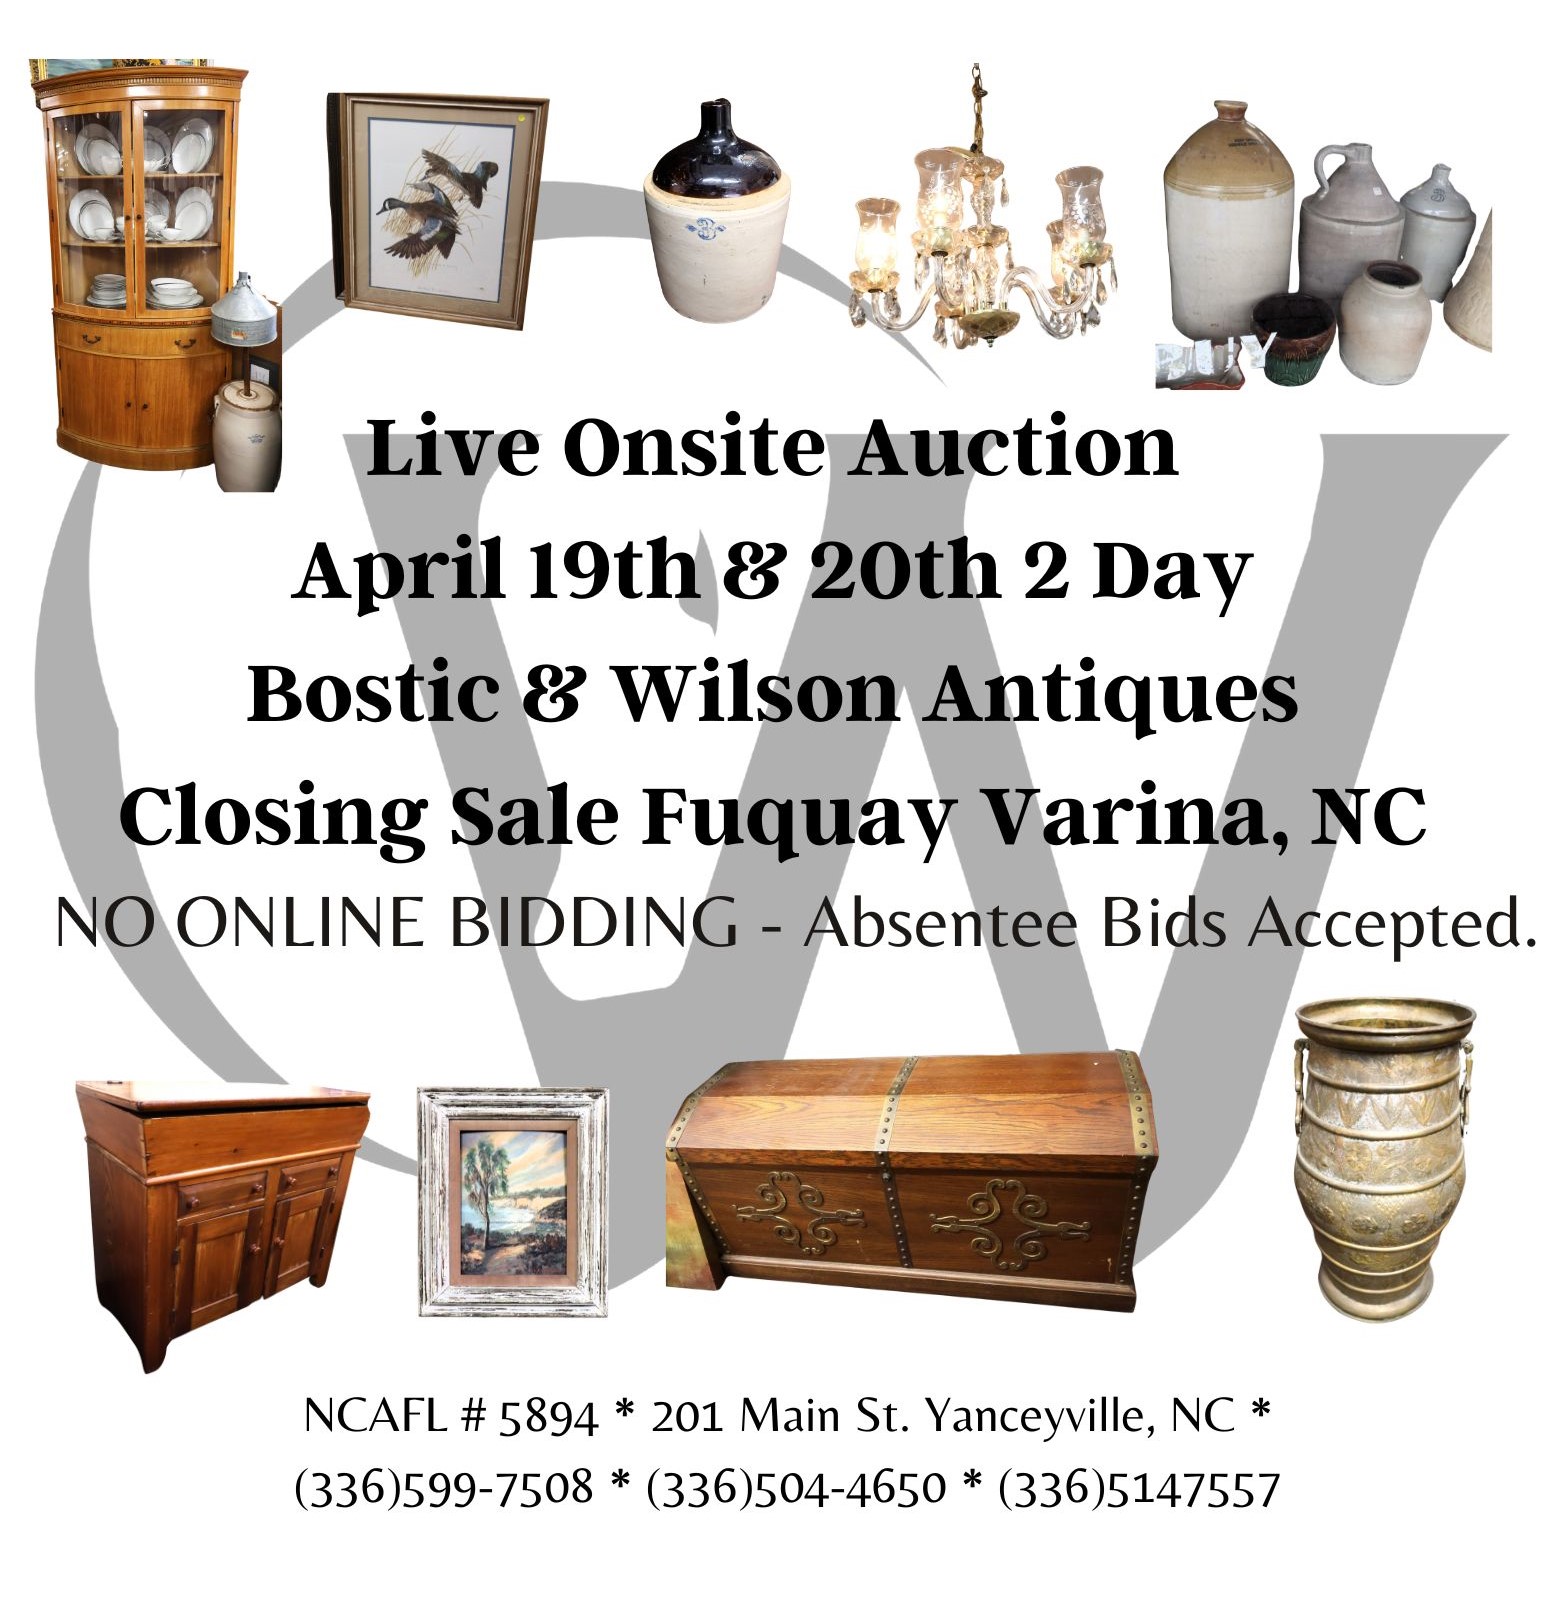 April 19th & 20th 10am 2 Day Onsite Auction - Bostic & Wilson Antiques Closing Sale